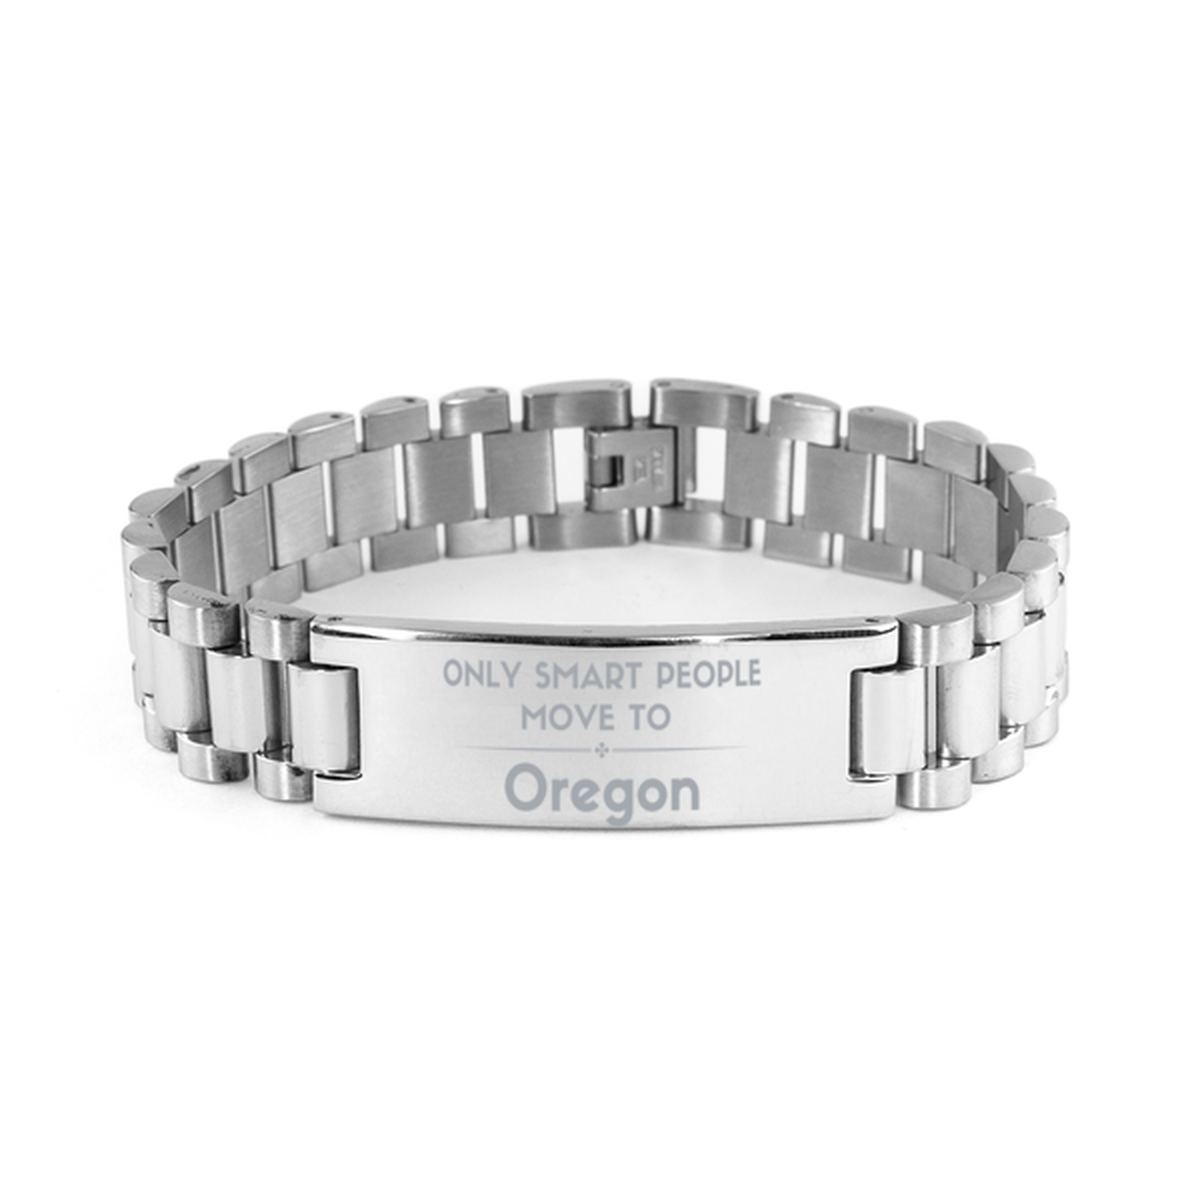 Only smart people move to Oregon Ladder Stainless Steel Bracelet, Gag Gifts For Oregon, Move to Oregon Gifts for Friends Coworker Funny Saying Quote